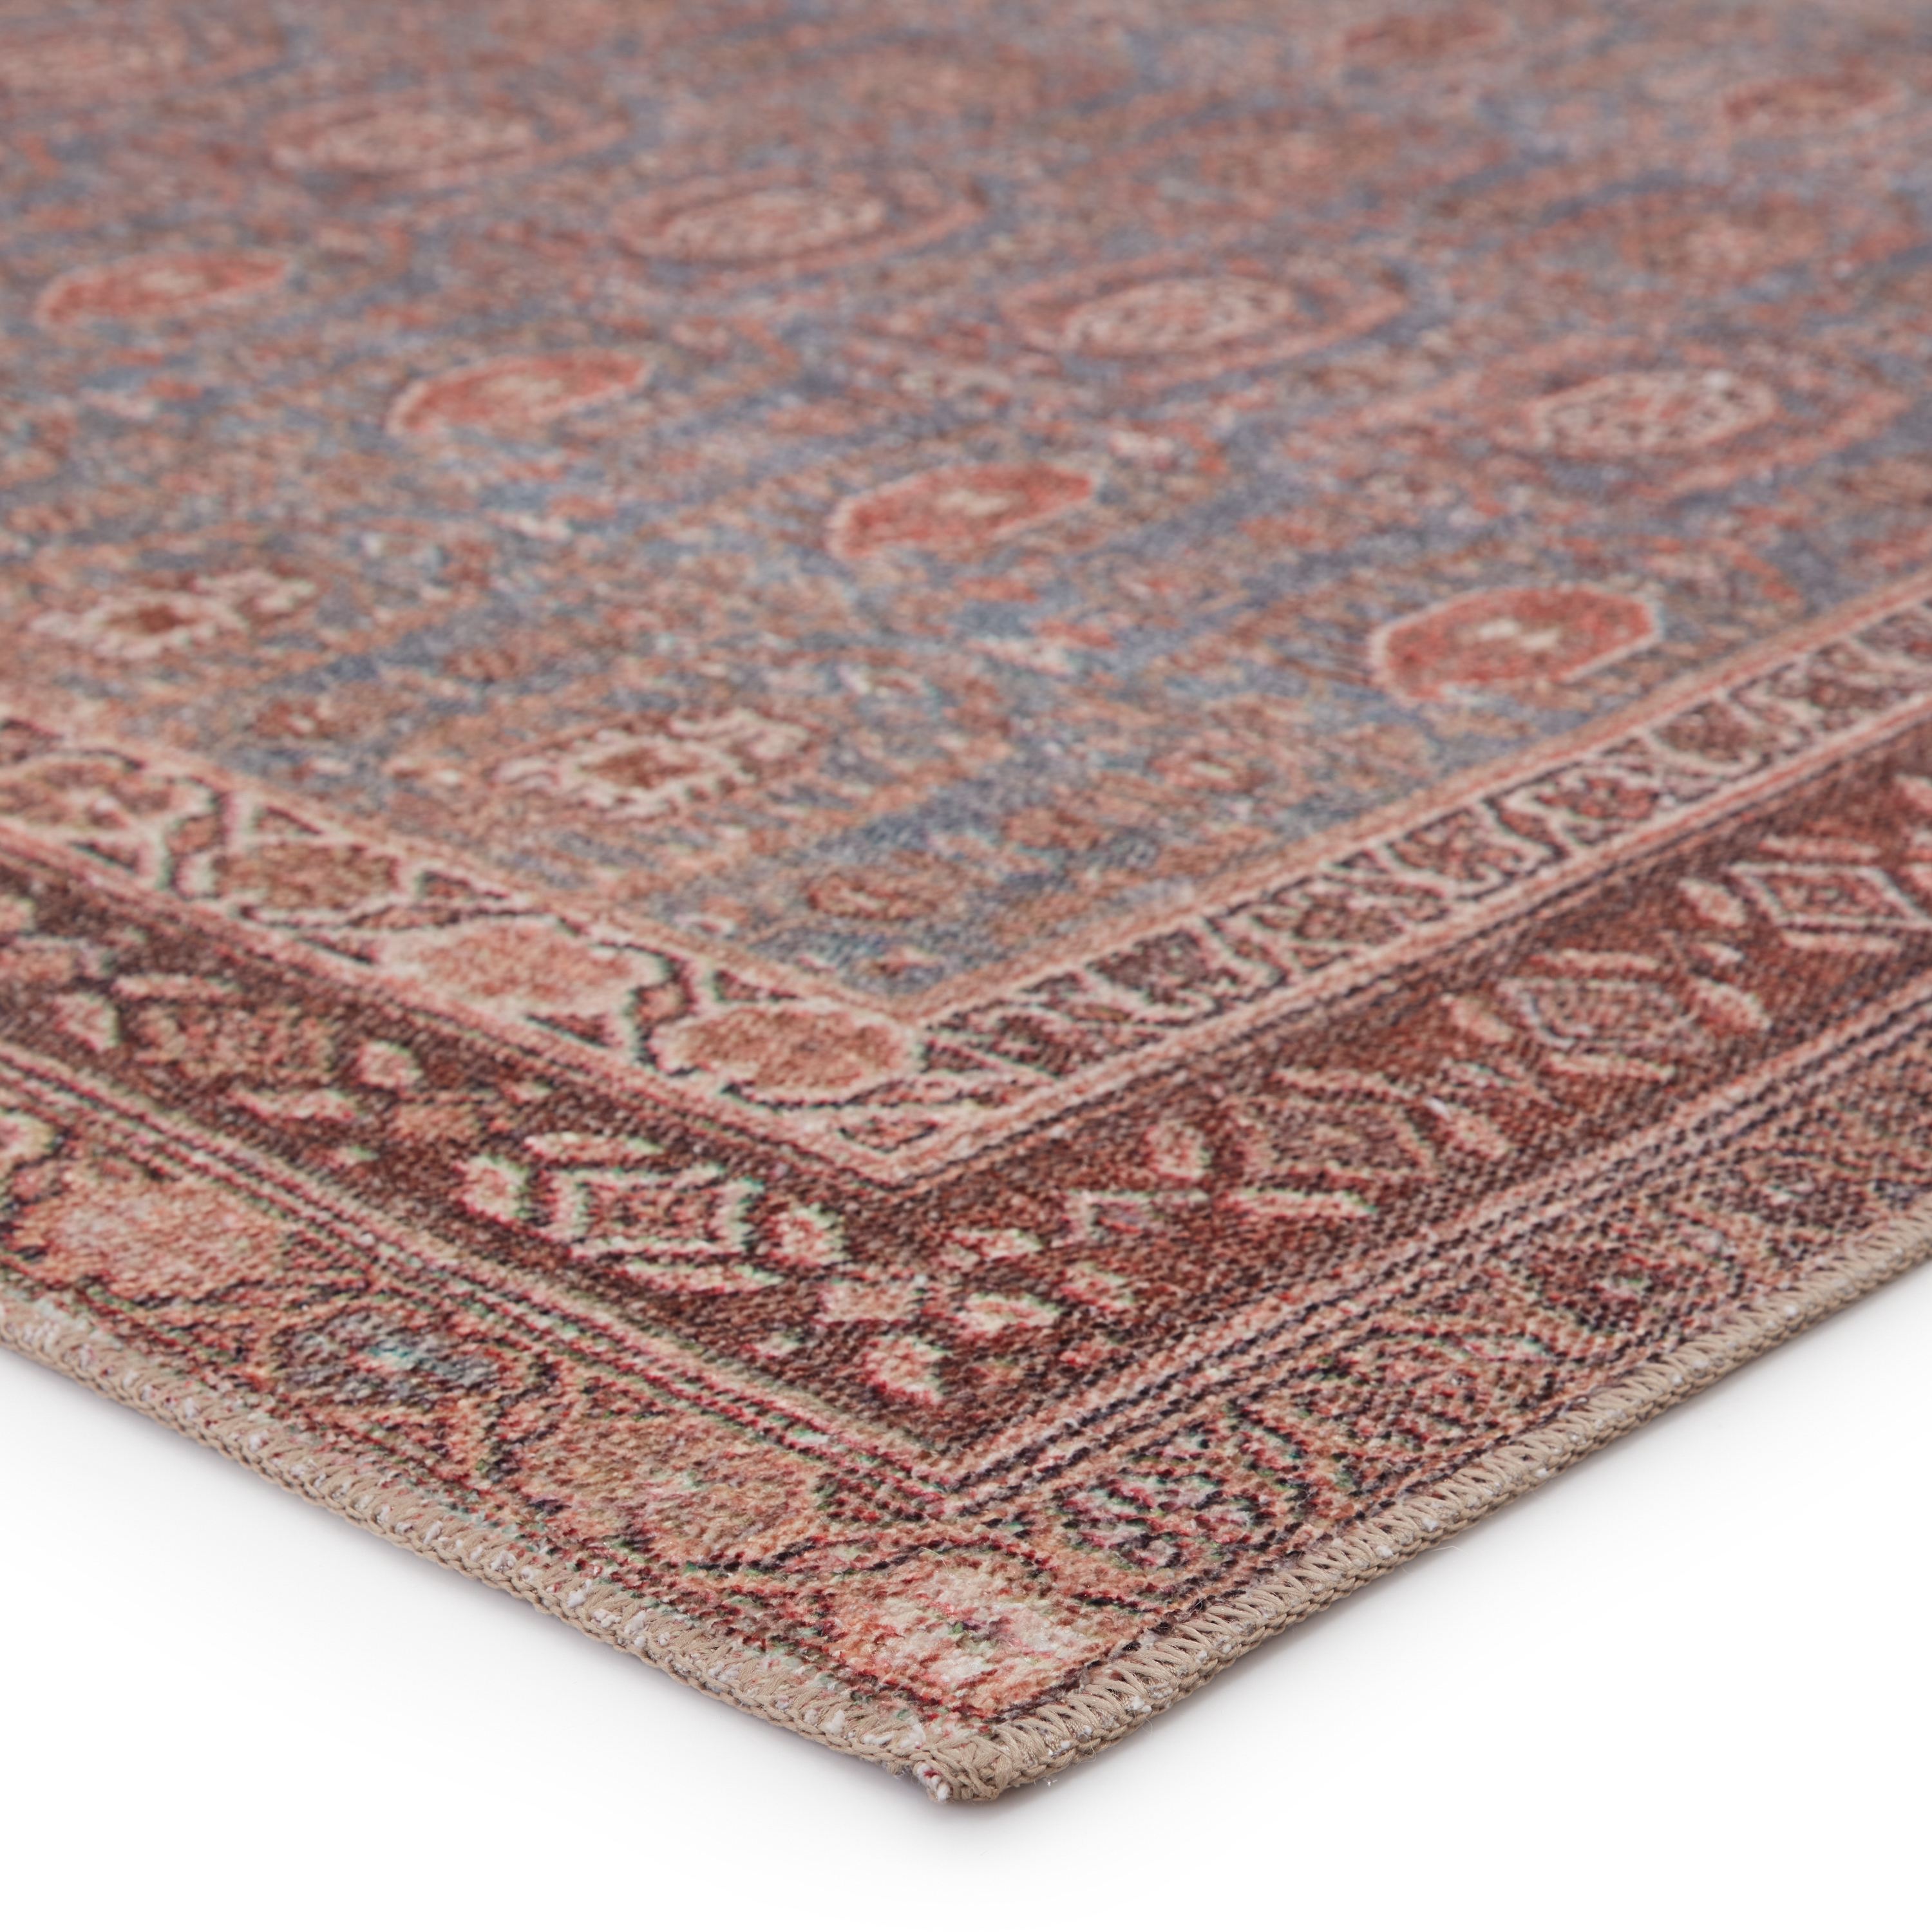 Vibe by Tielo Oriental Area Rug, Blue & Brown, 5 ' x 7'6" - Image 1